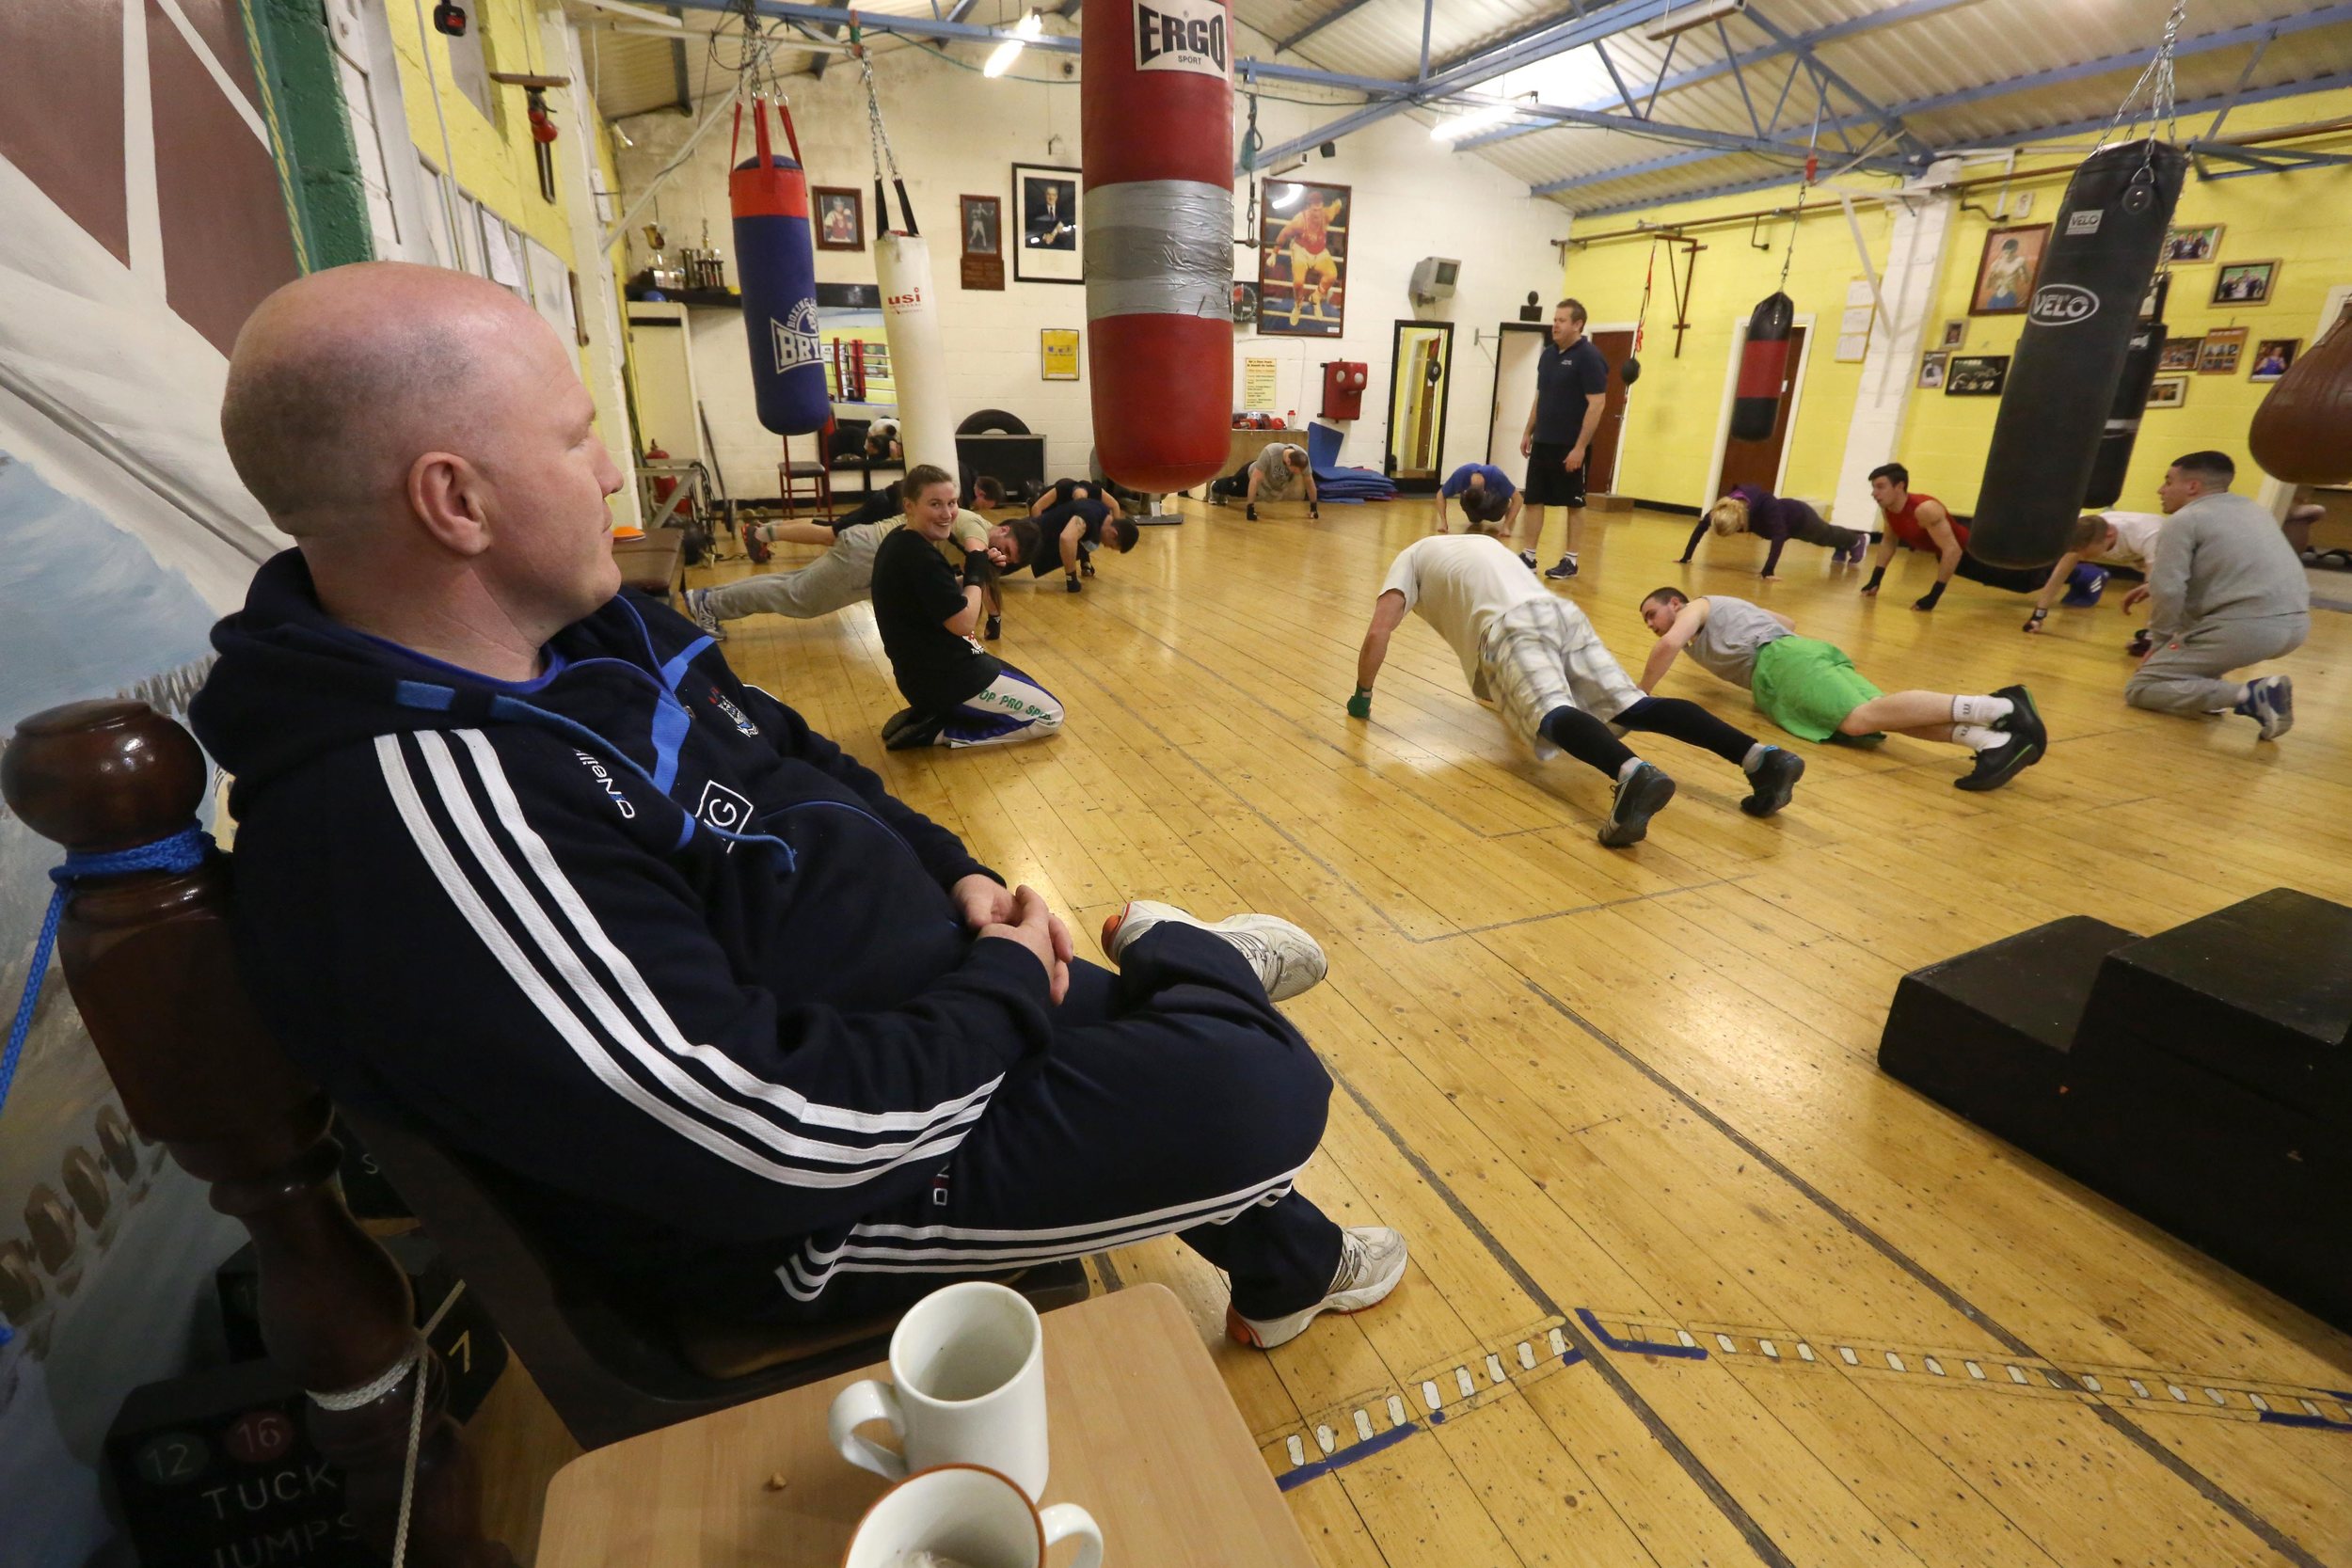  Olympic champion boxer Michael Carruth watching boxers train at Drimnagh Boxing club 